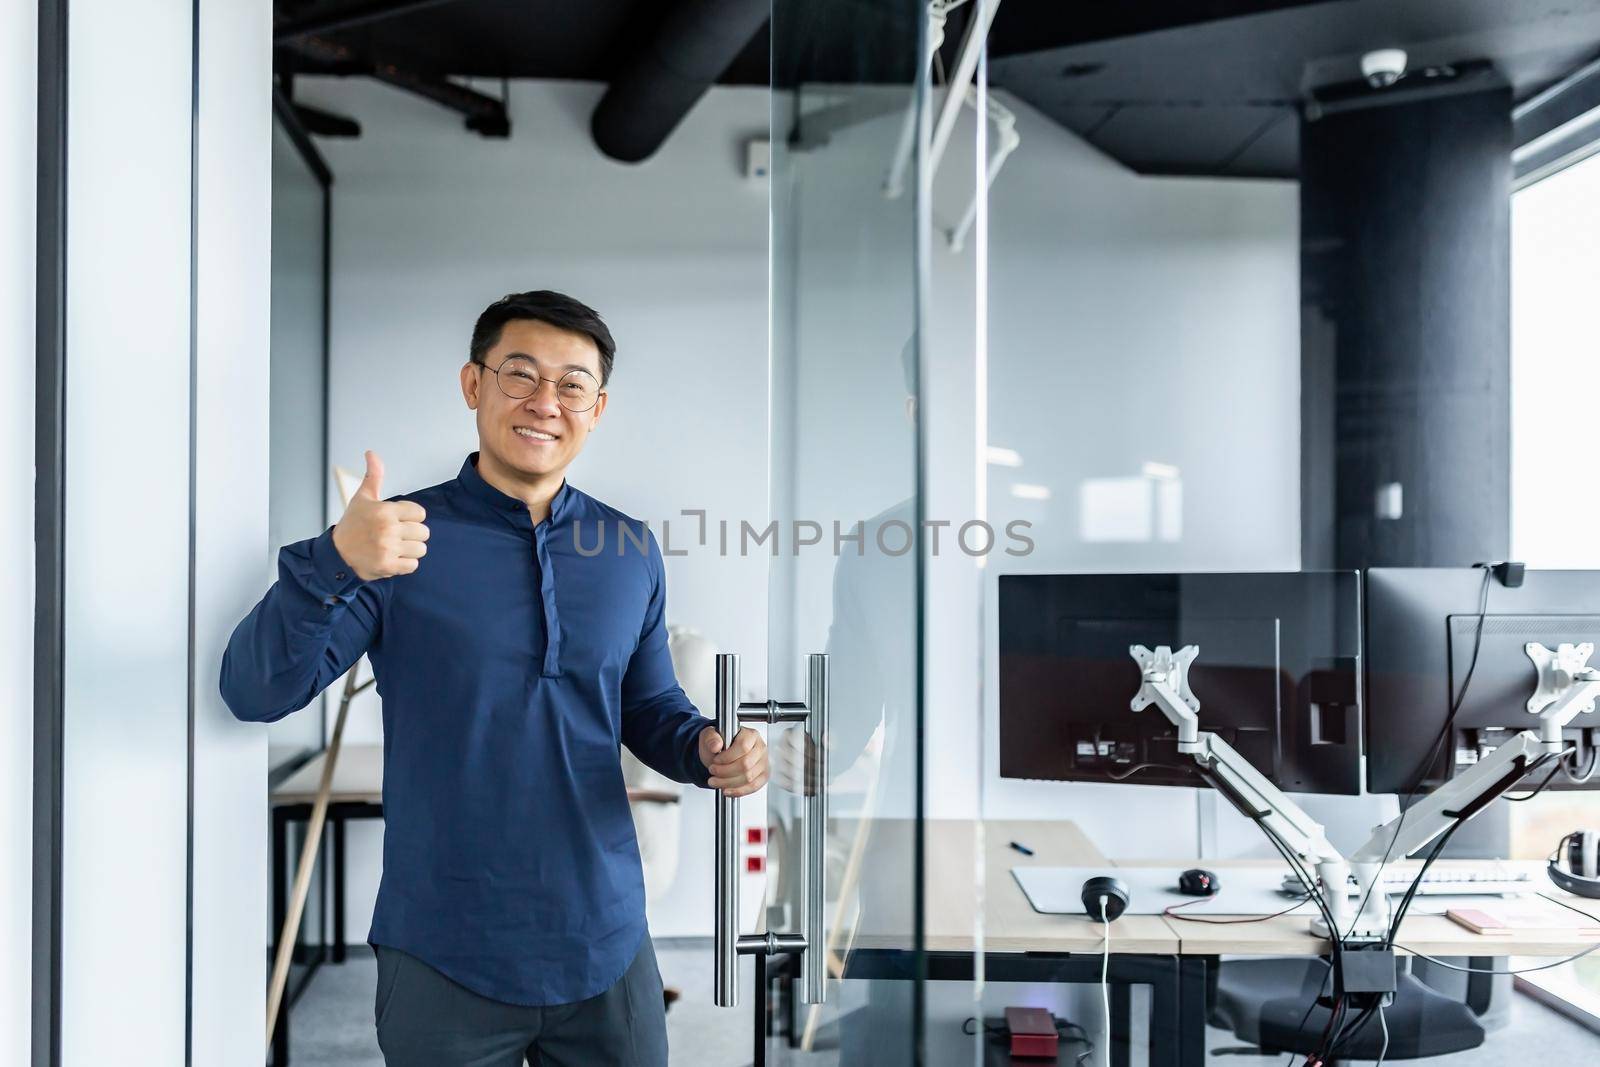 Portrait of Asian designer engineer, man smiling and looking at camera holding thumb up affirmative, businessman working with several computers inside twisted office building.